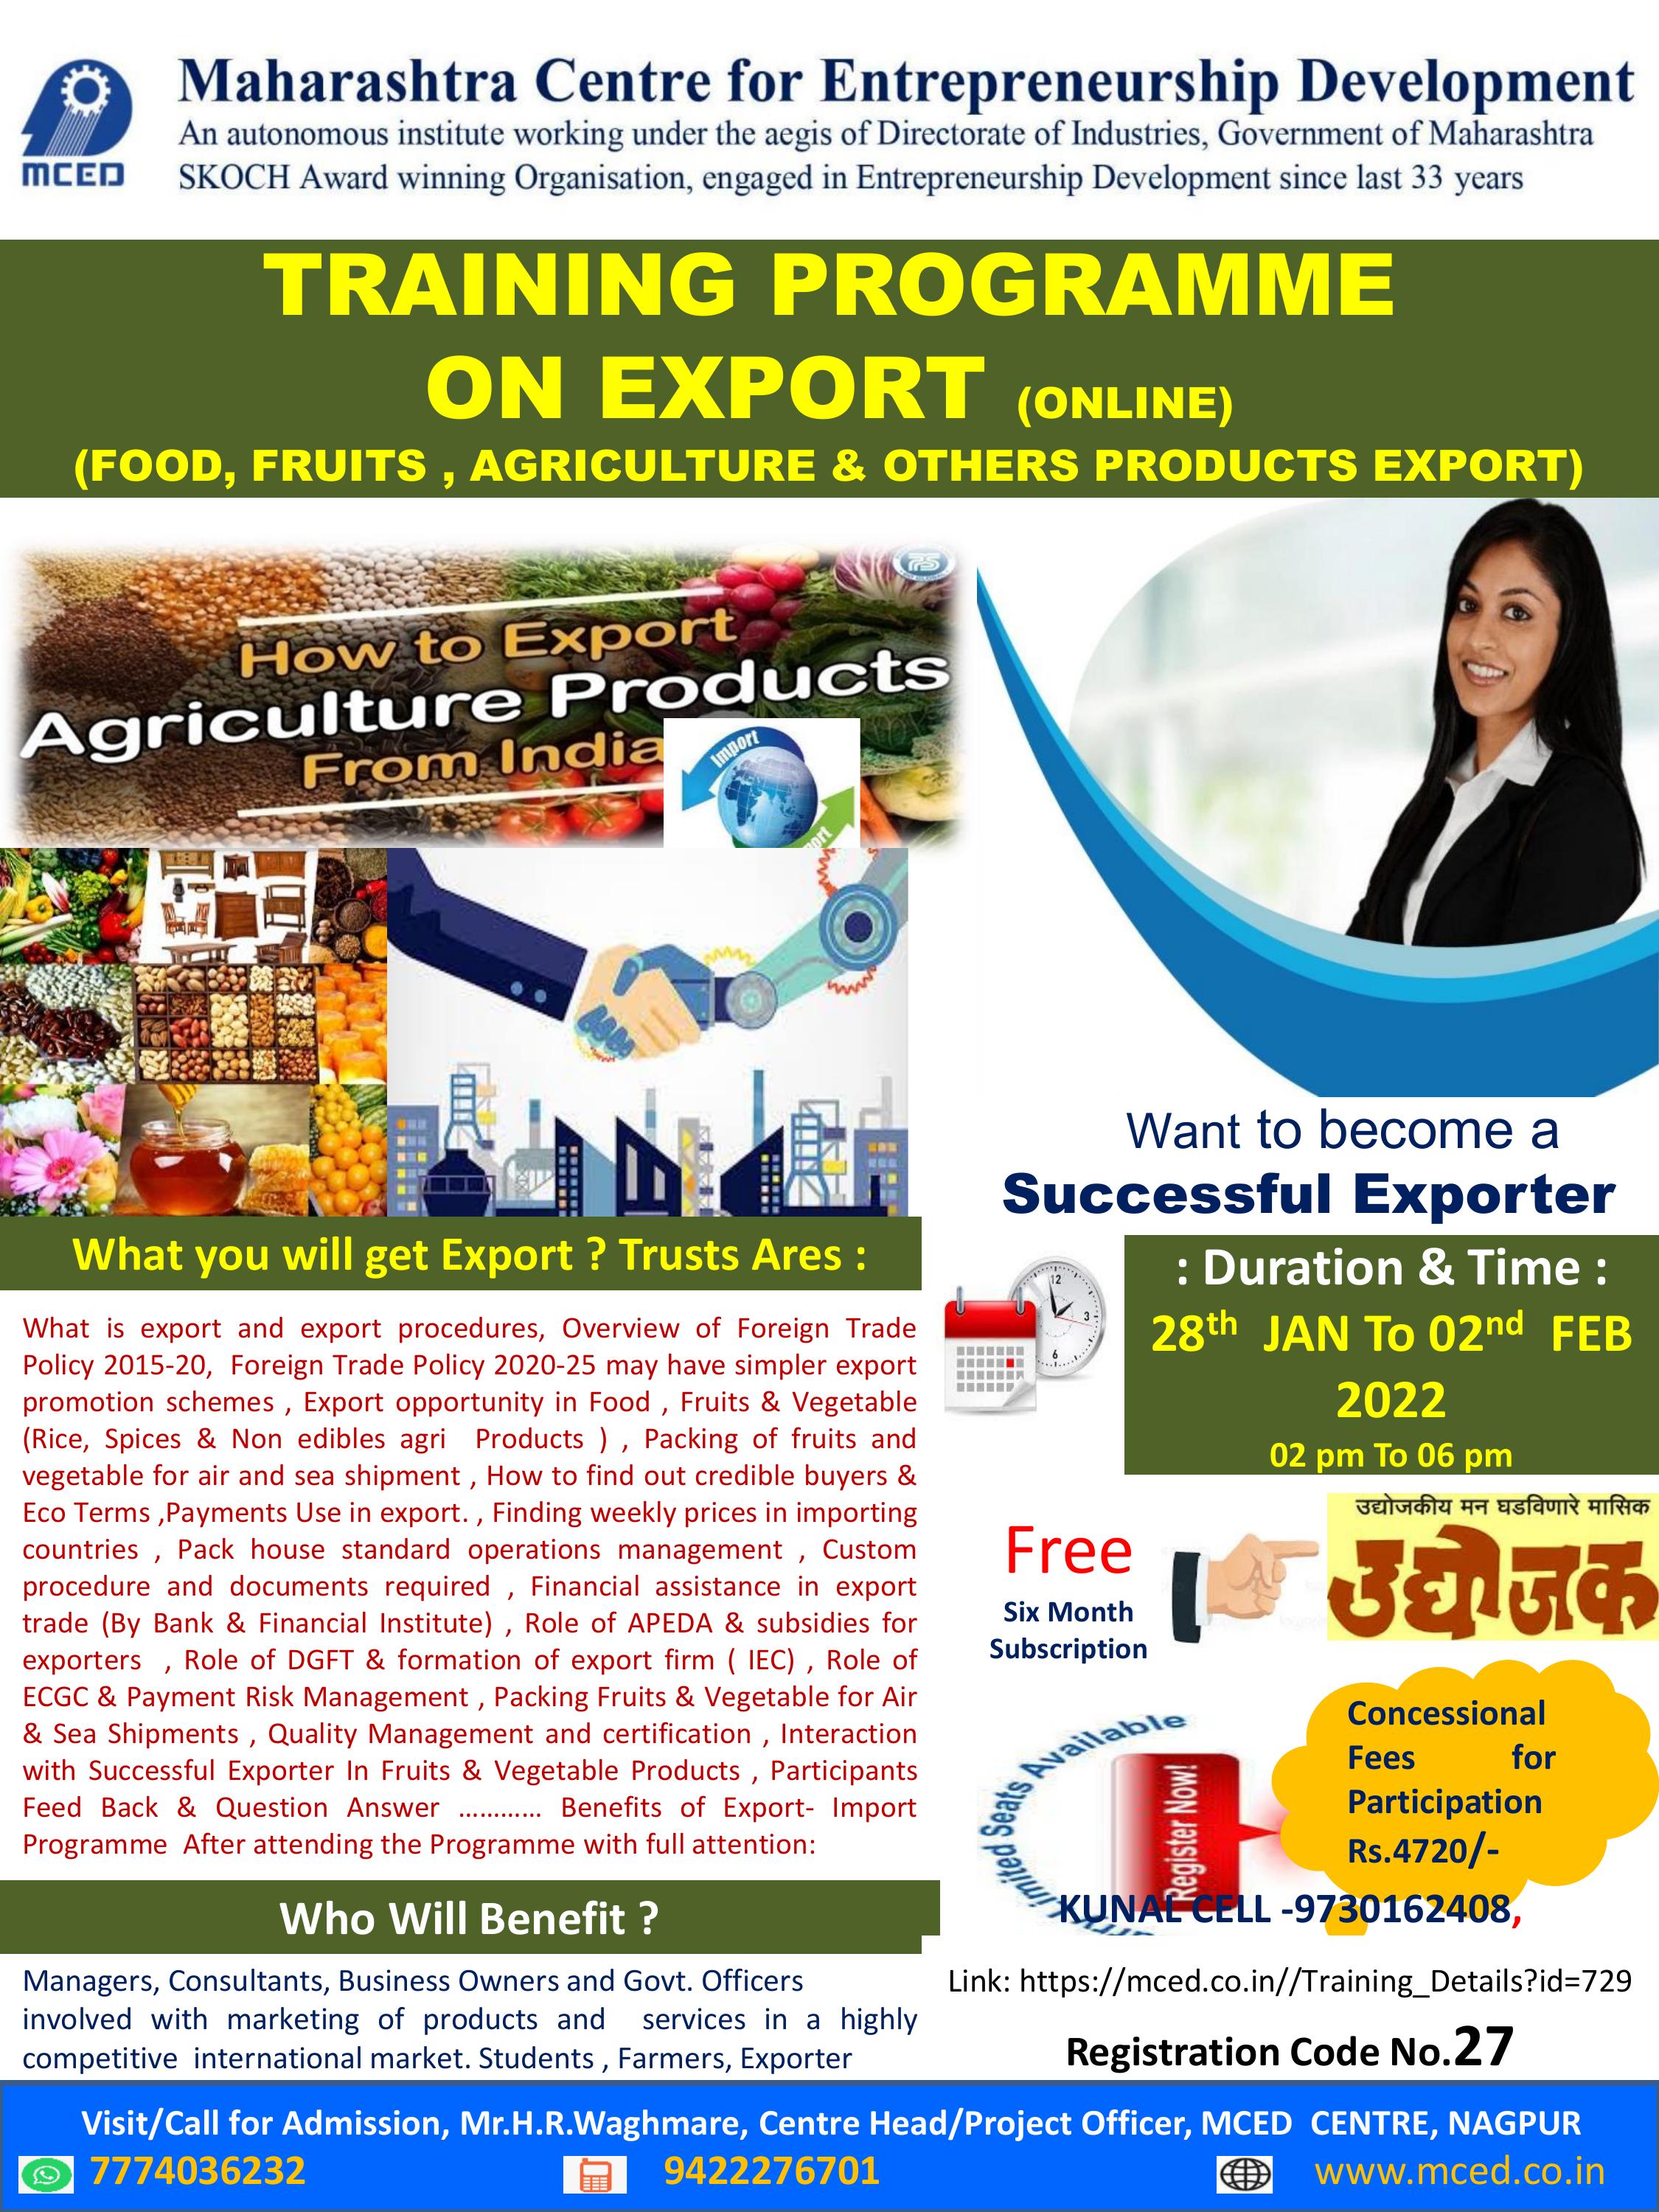 TRAINING PROGRAMME ON EXPORT  (FOOD, FRUITS , AGRICULTURE & Others Products EXPORT)